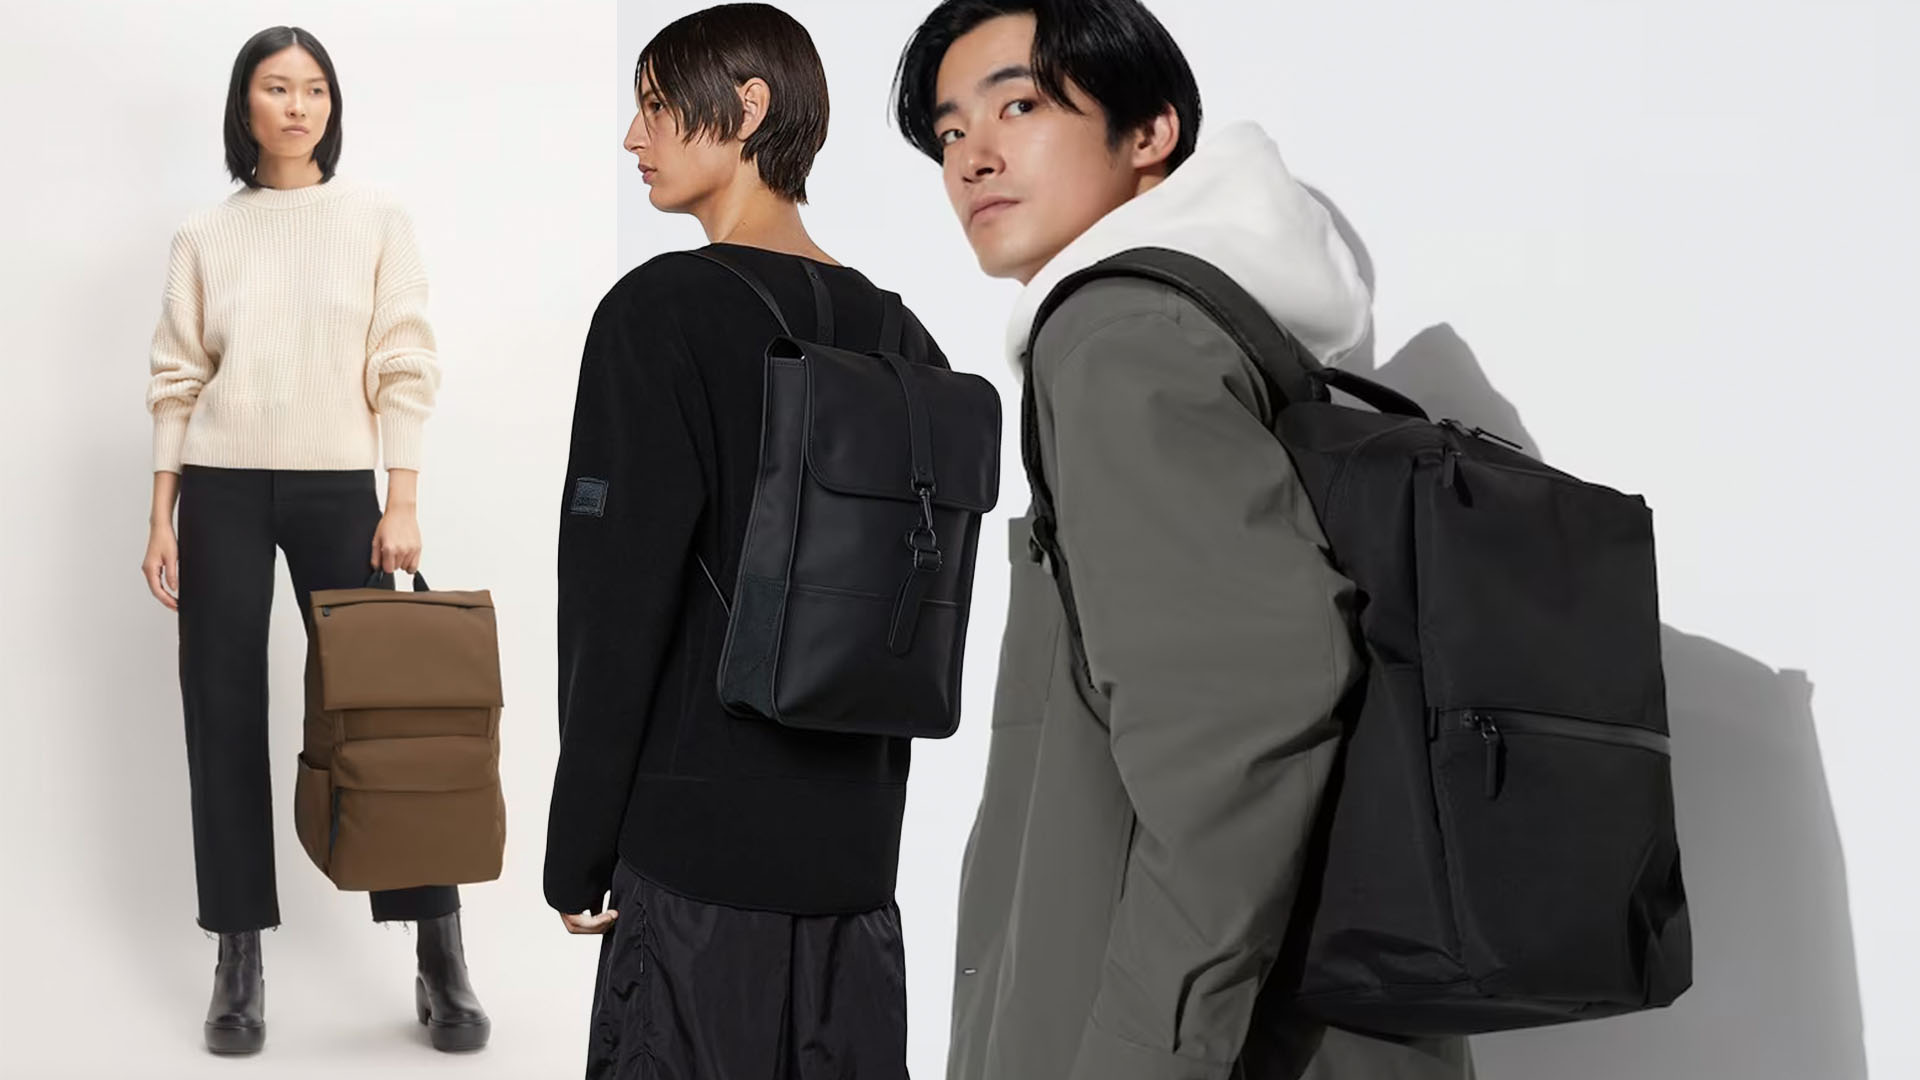 Best Backpacks From $33 For Travel, Work, Gym & Even Going Out —  Lightweight, Stylish & Versatile Backpacks For Every Budget - 8days